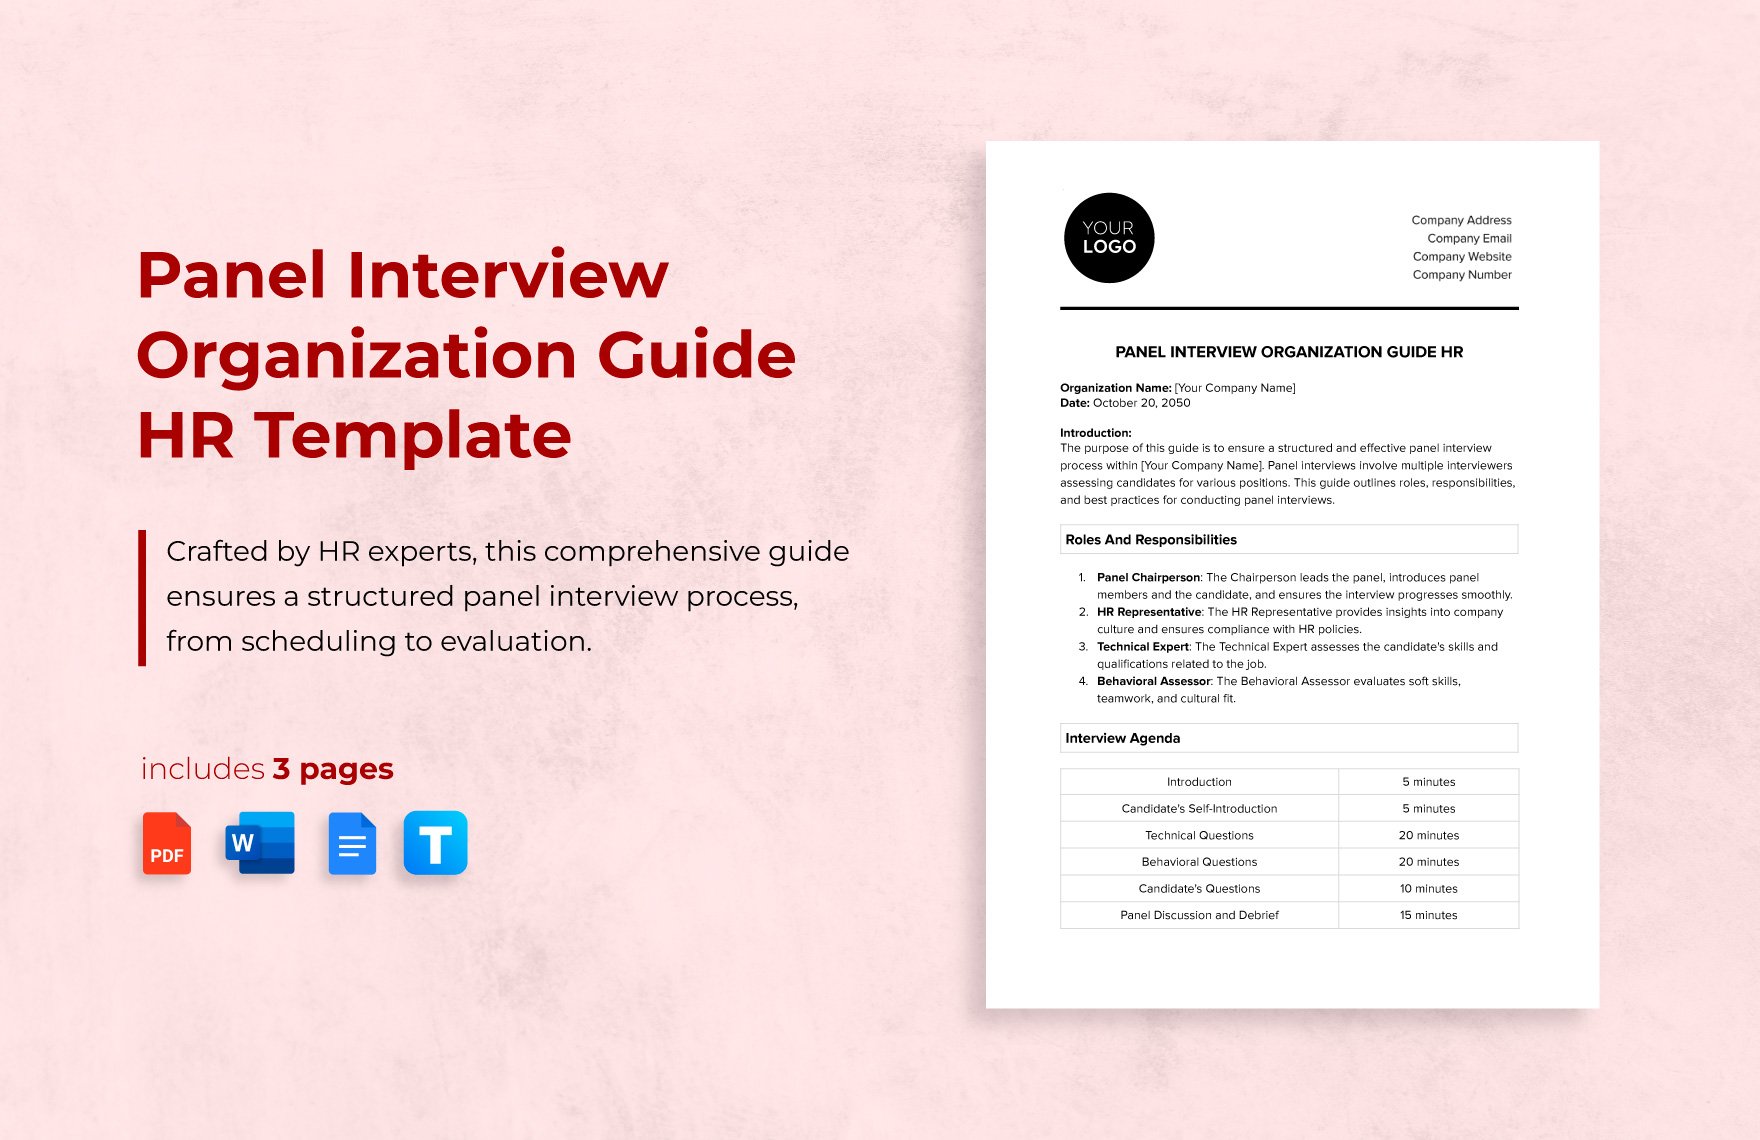 Panel Interview Organization Guide HR Template in Word, Google Docs, PDF